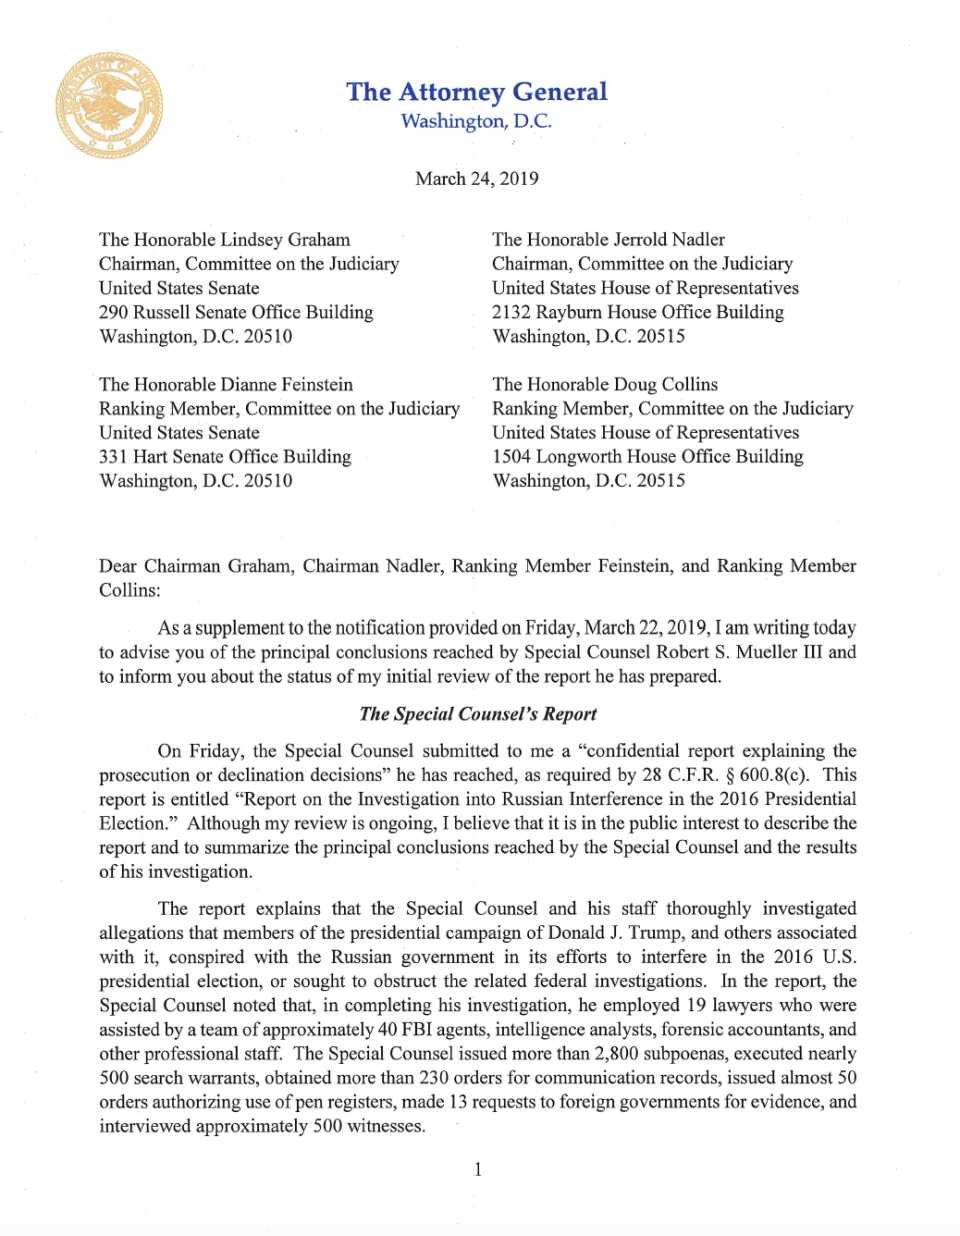 Page 1 of Attorney General William Barr's letter to Congress on Special Counsel Robert Mueller's report.